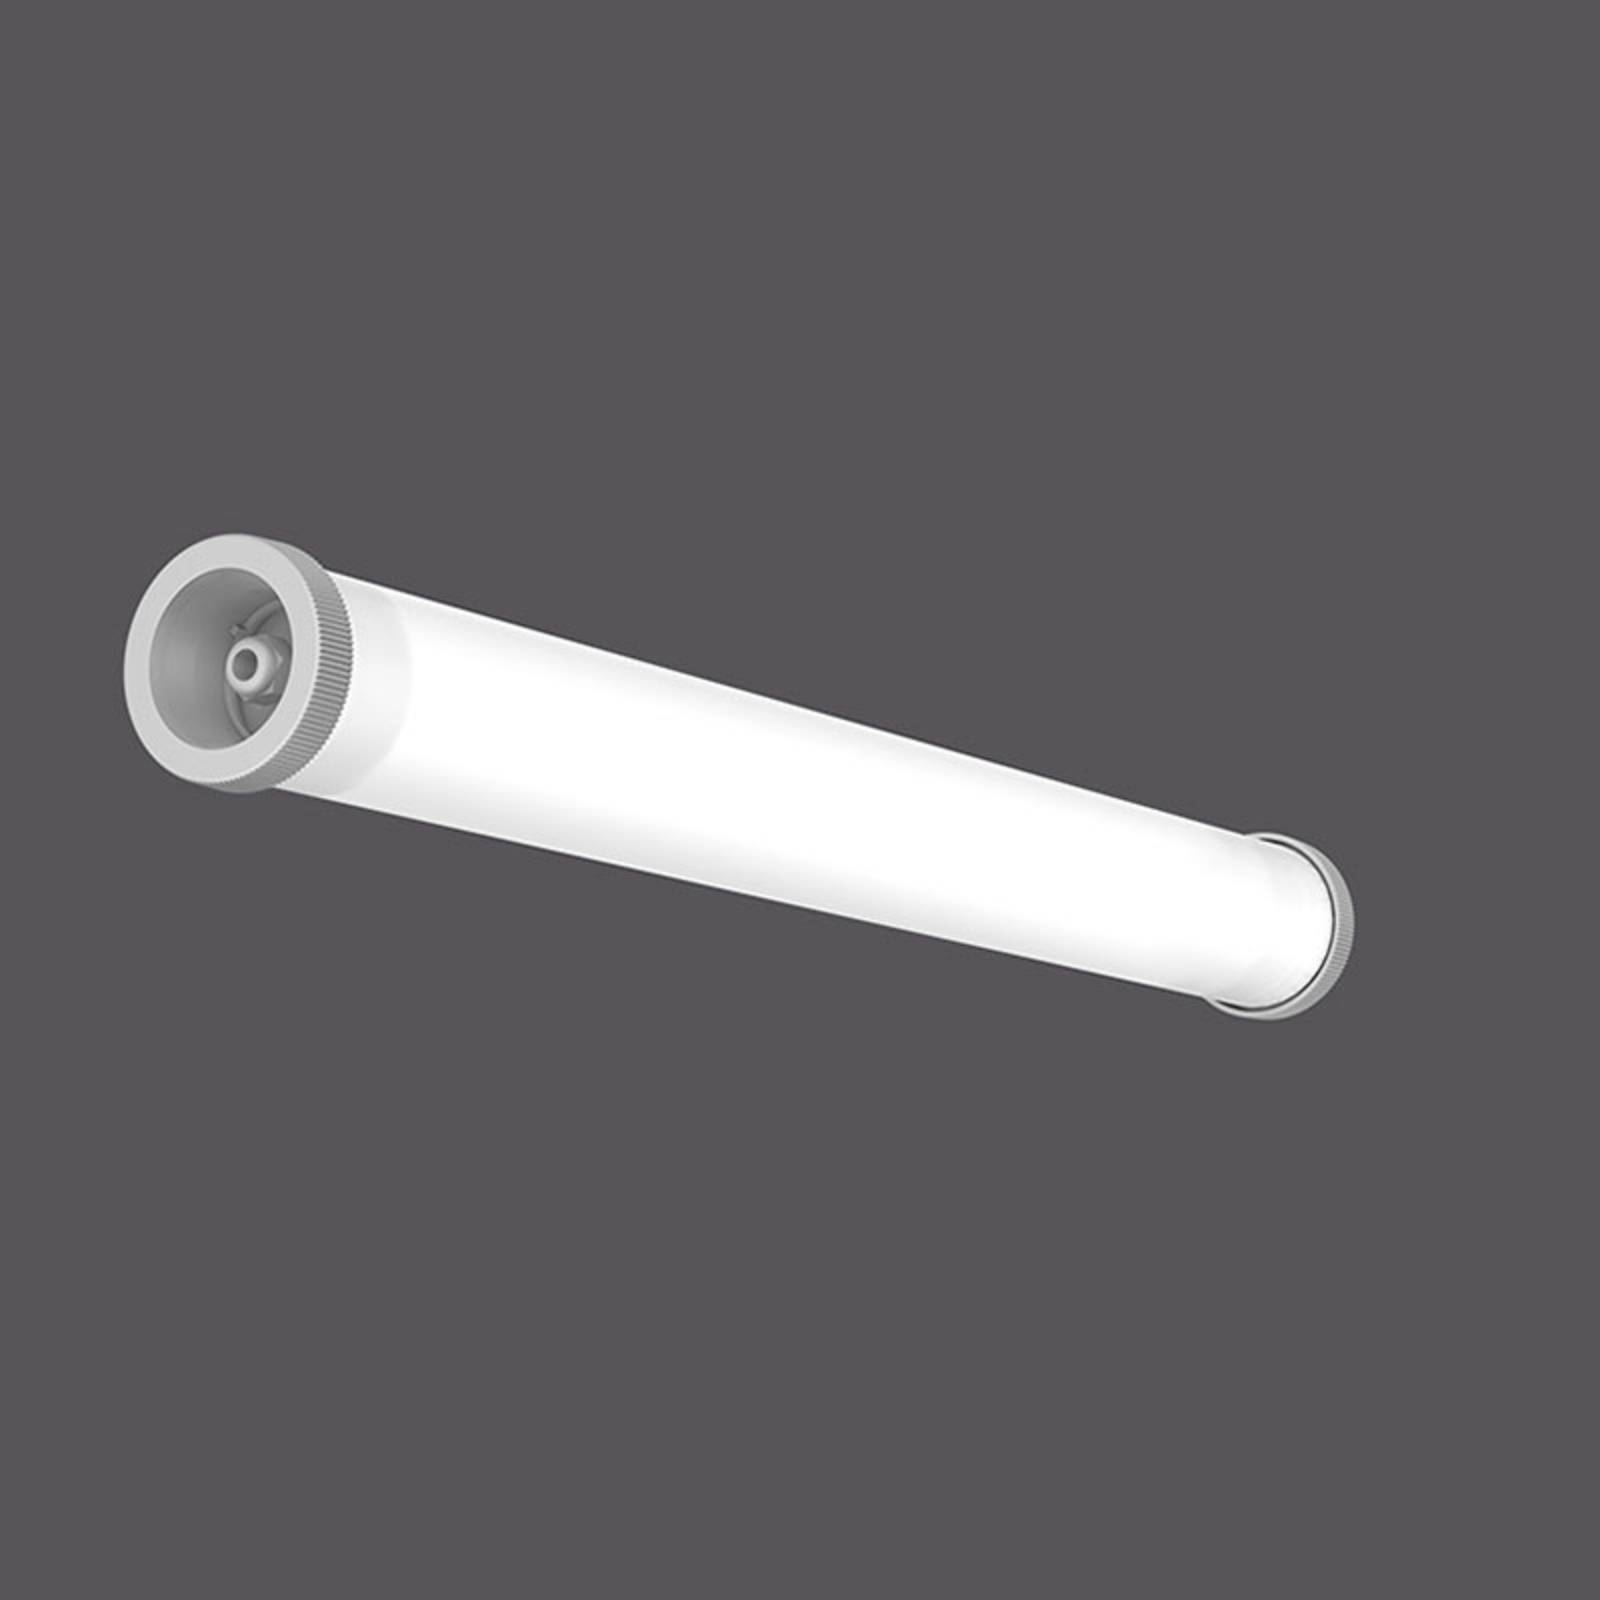 RZB Planox Tube lampe pce humide on/off 23W 68,5cm